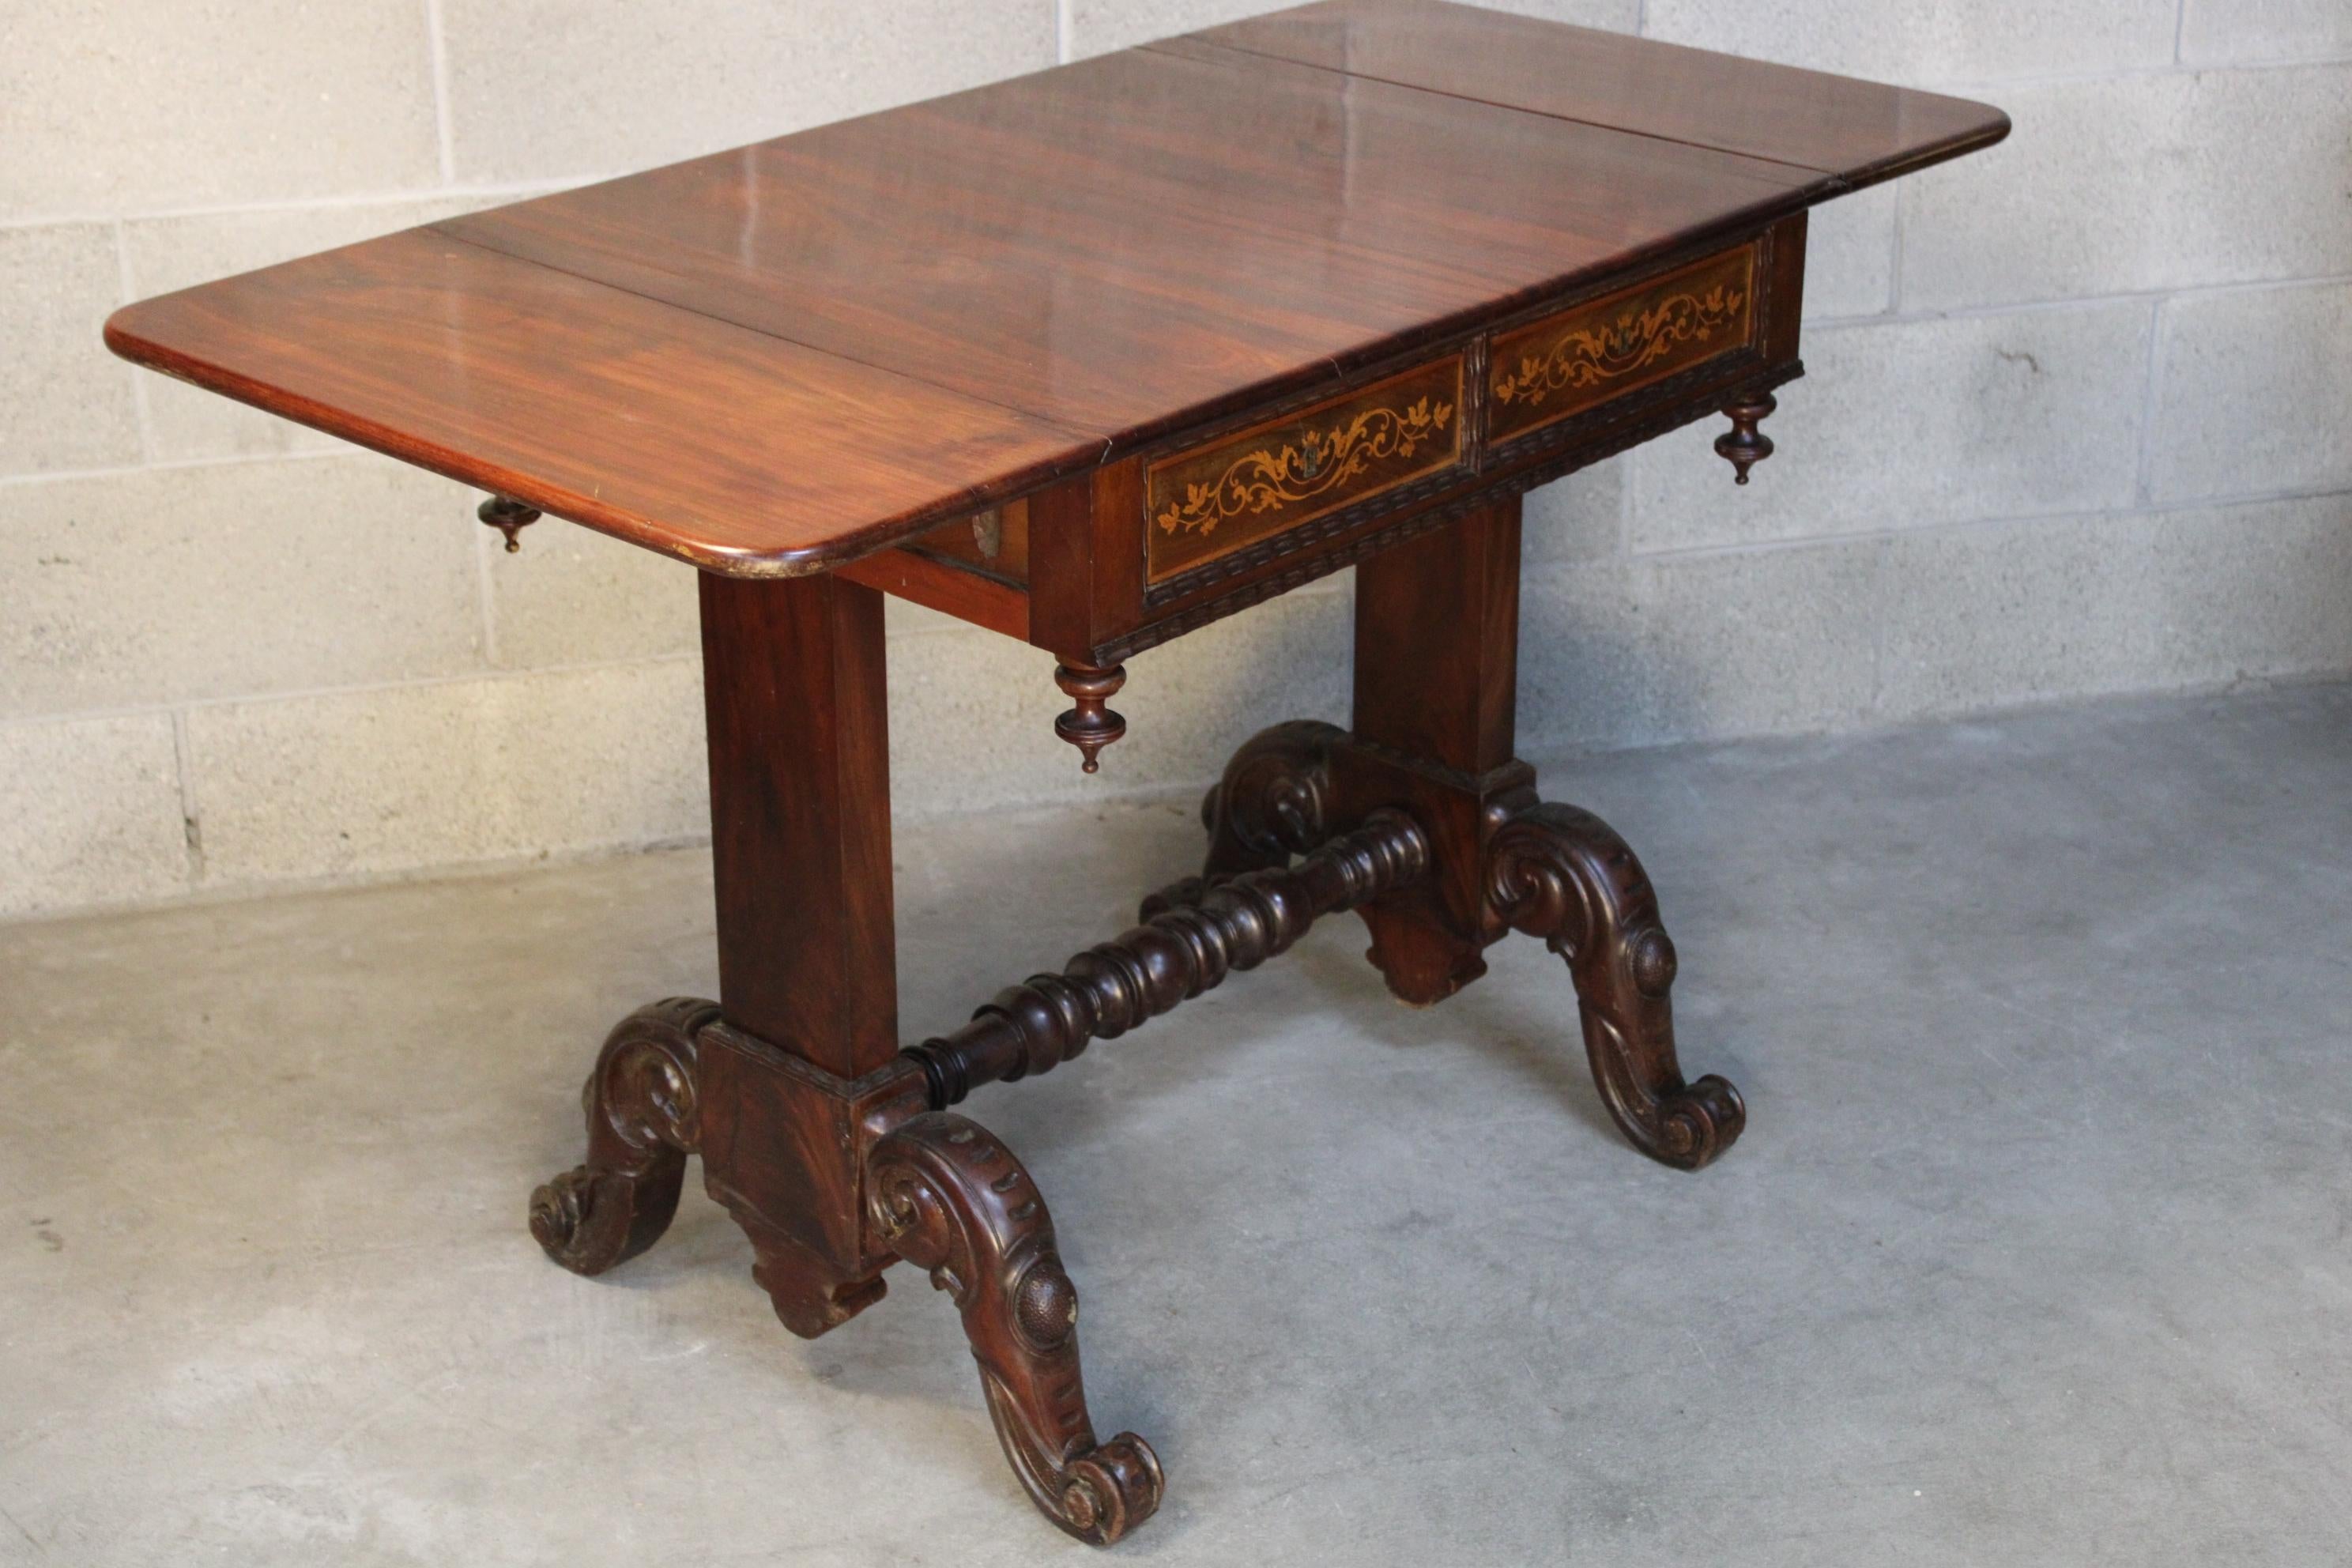 19th century inlaid Louis Philippe period center table in mahogany circa 1840 France
in good solid condition. Key is working
Dimensions:
 closed 60x70x75H cm. open 60x122x75H cm.
will be shipped inside a safe wood crate